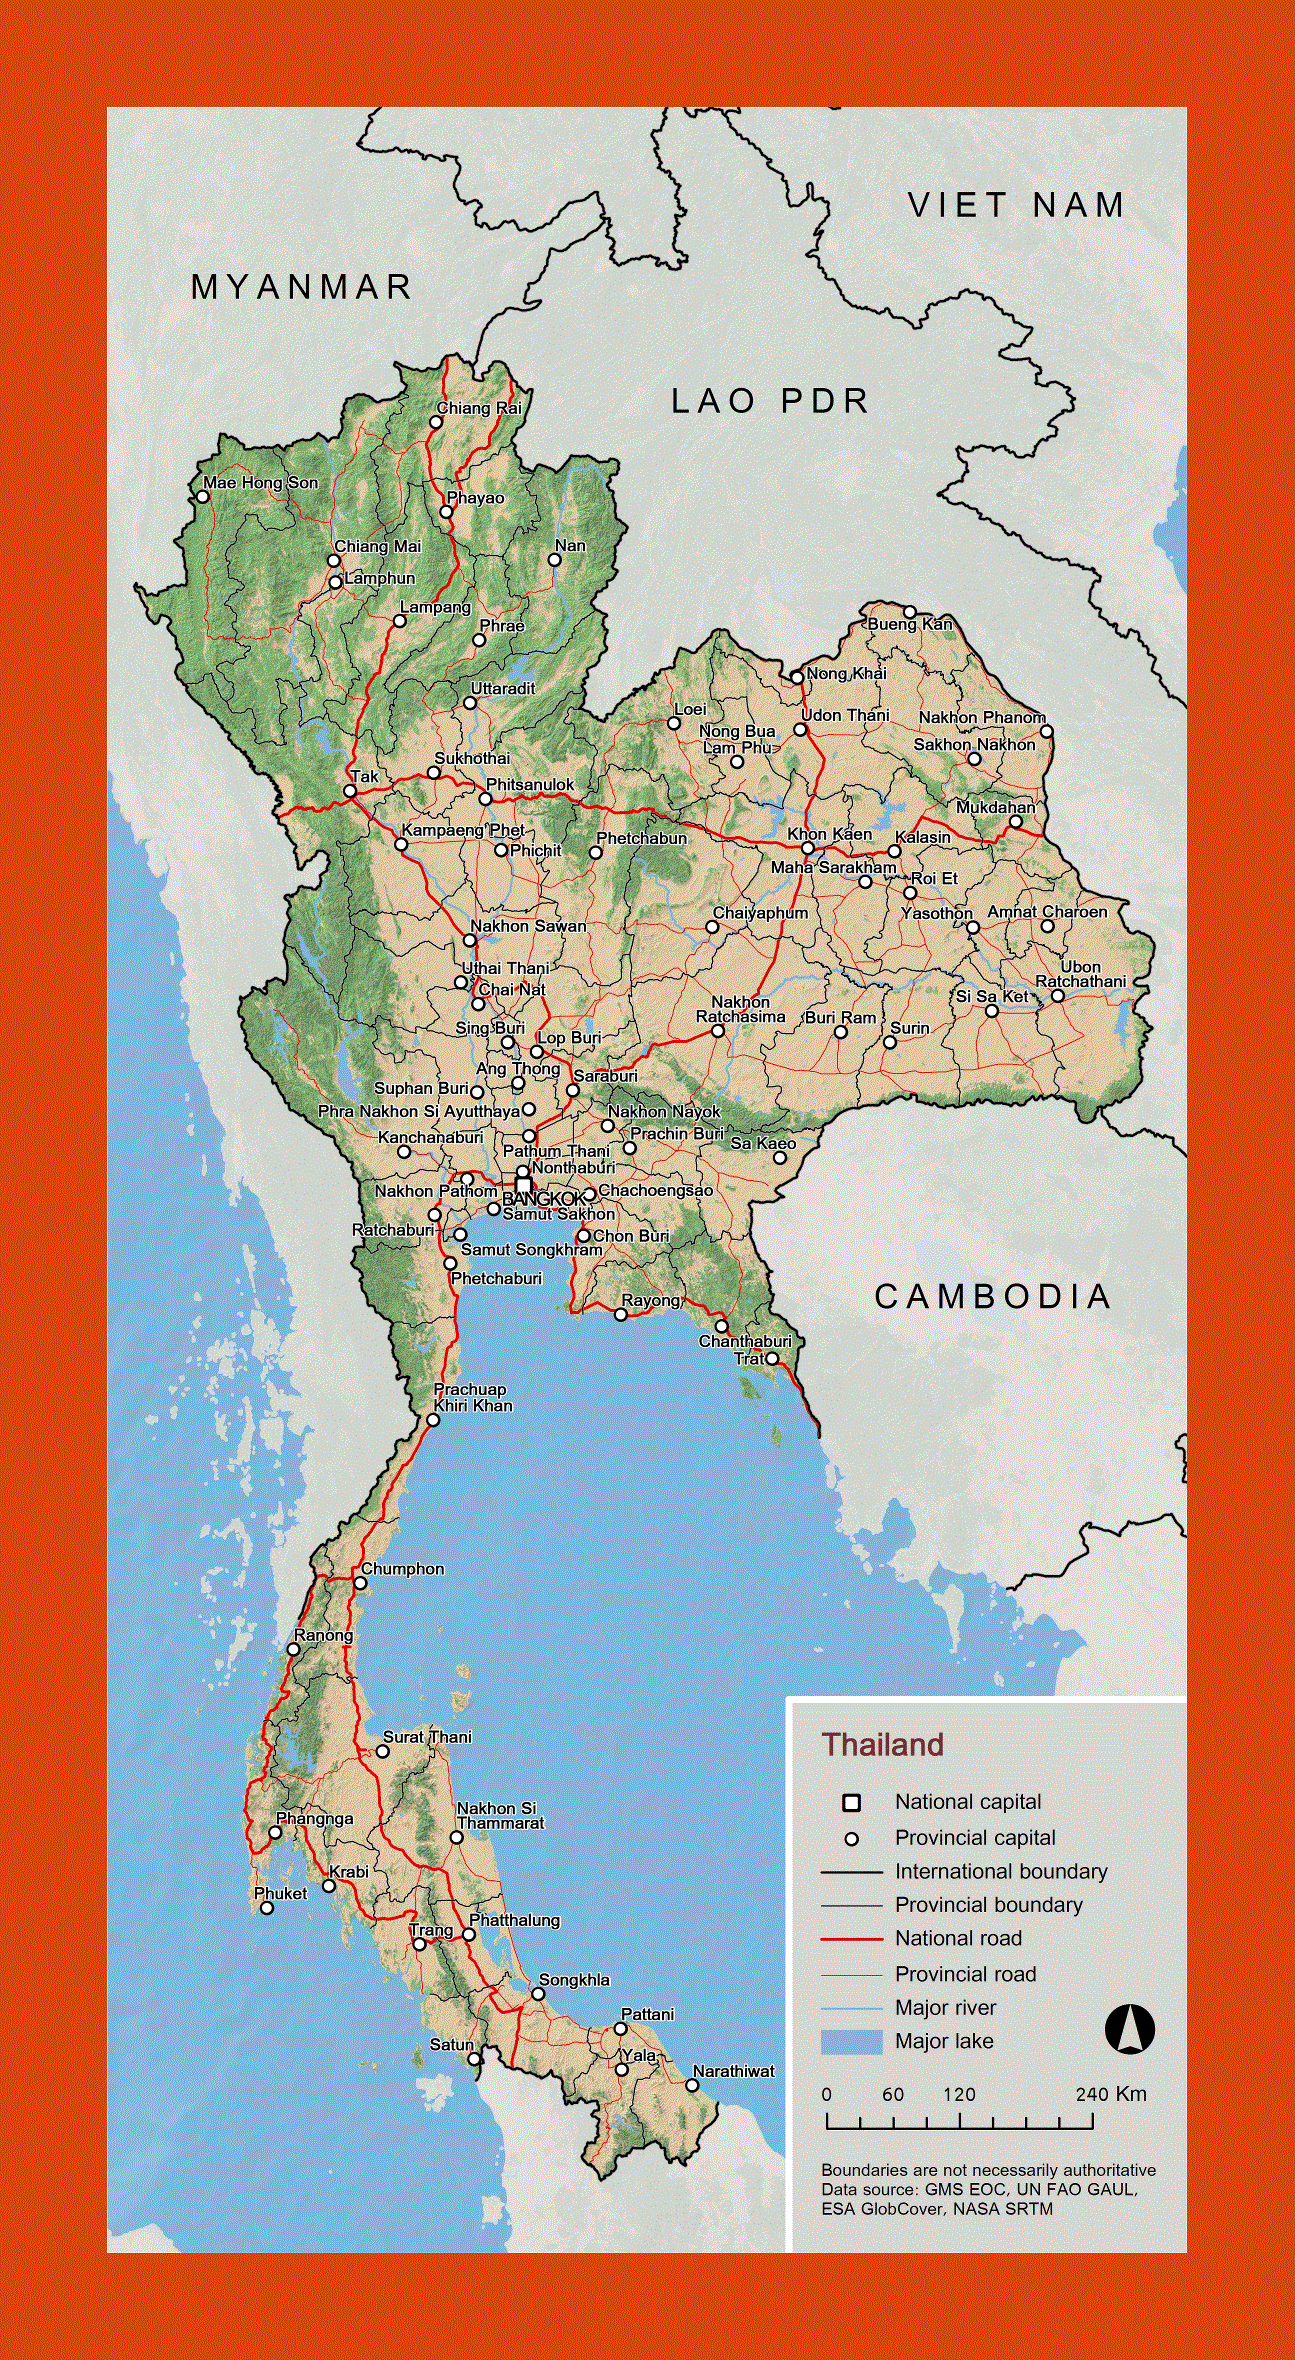 Overview map of Thailand